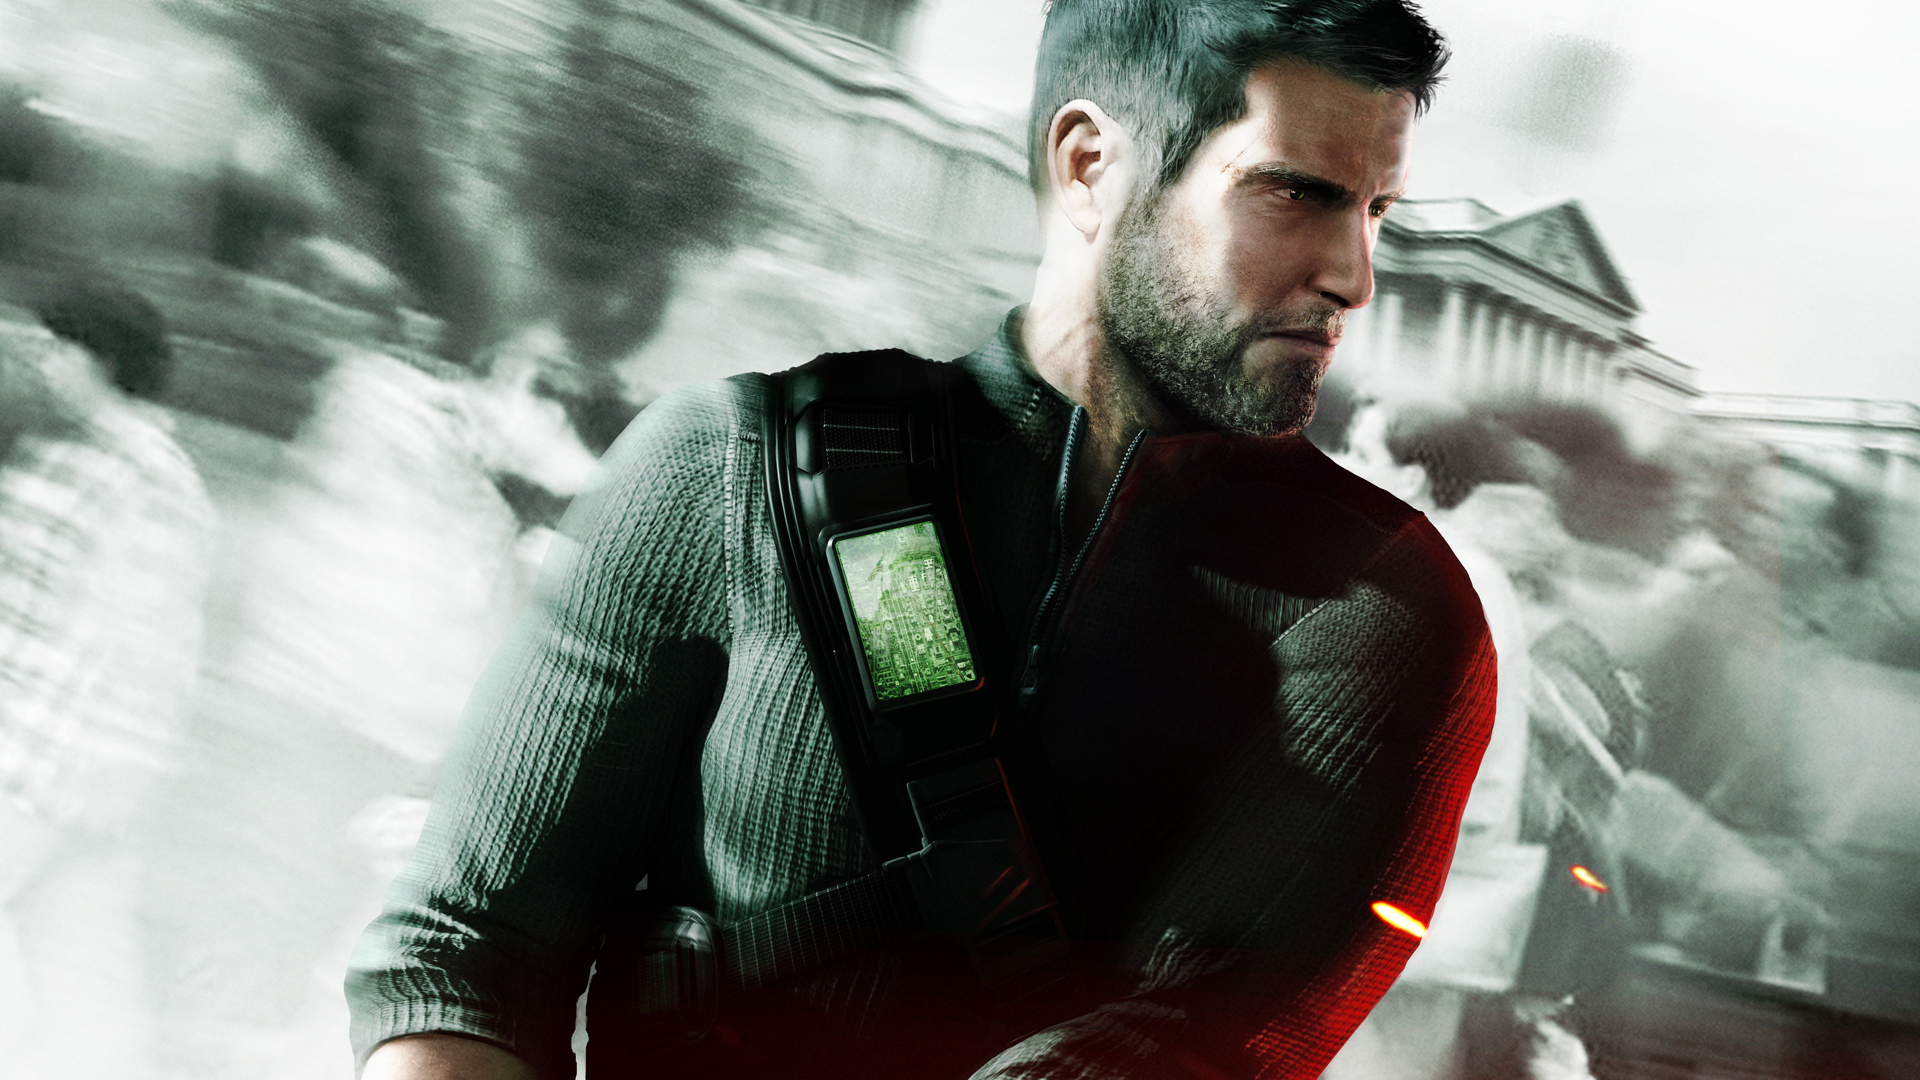 Nomad Cole D Walker Midas Sam Fisher 4K HD Tom Clancys Ghost Recon  Breakpoint Wallpapers  HD Wallpapers  ID 111061